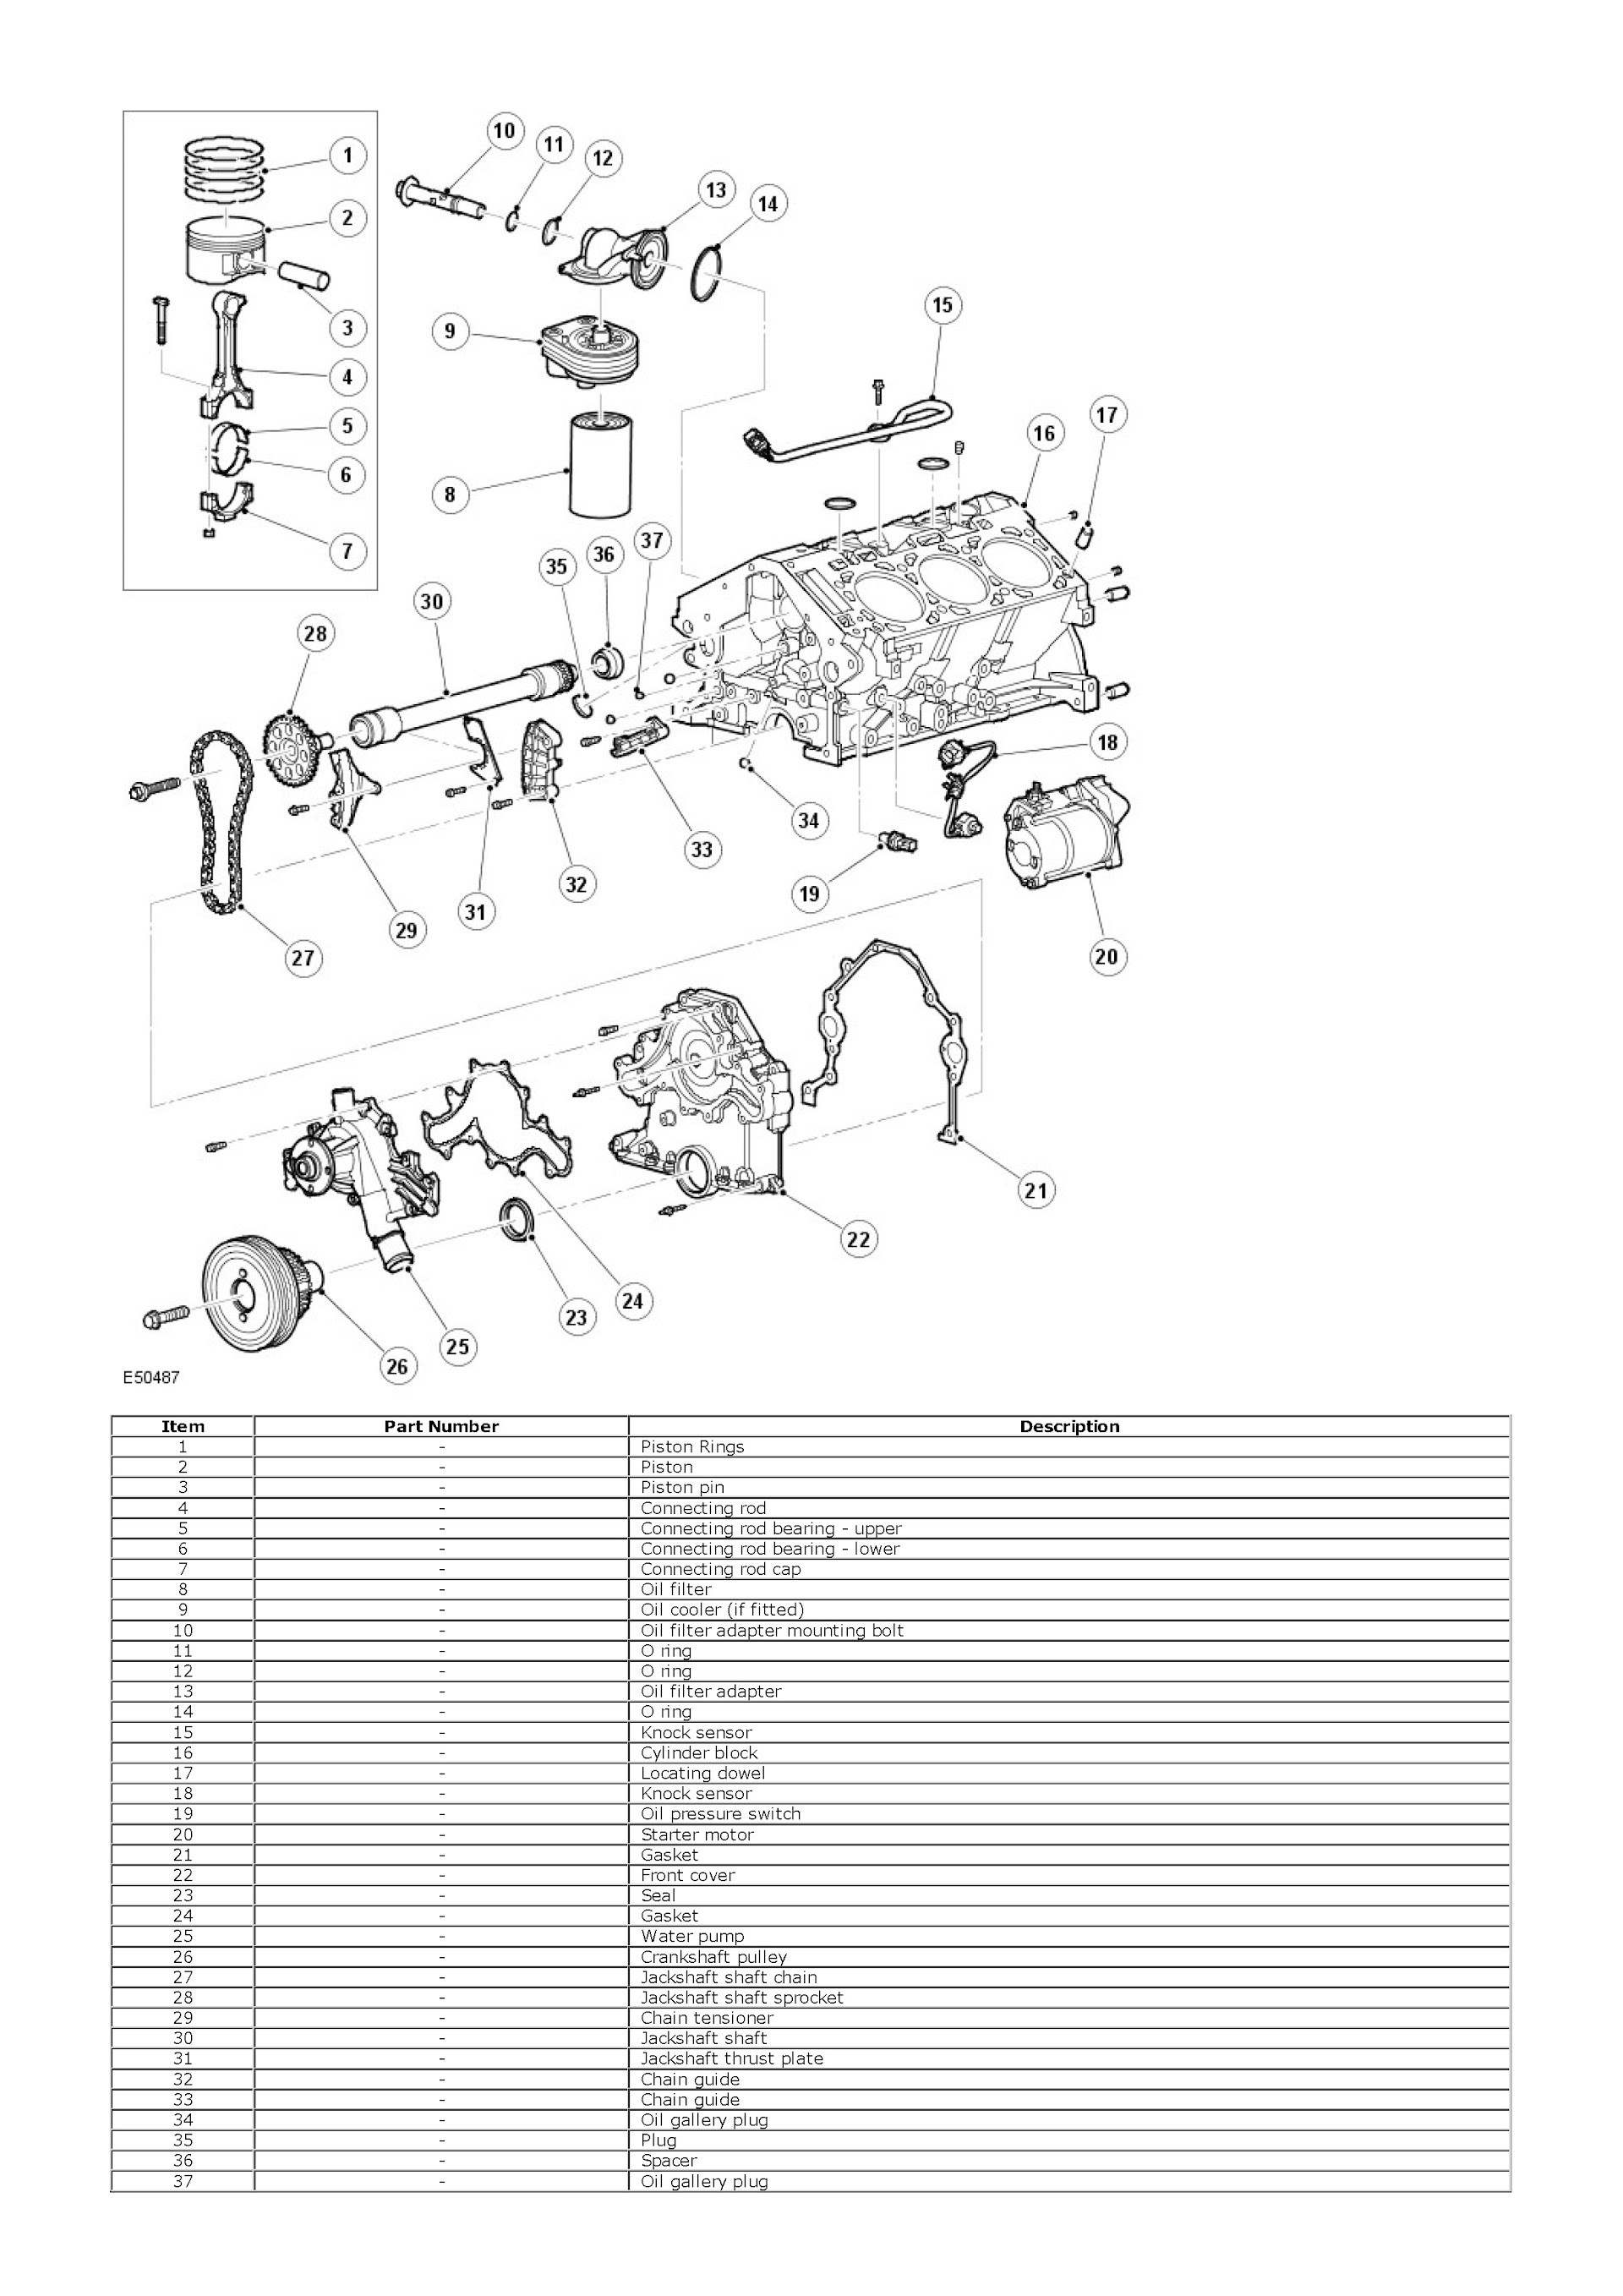 2009-2011 Land Rover Discovery 4 Repair Manual, Engine Unit Components